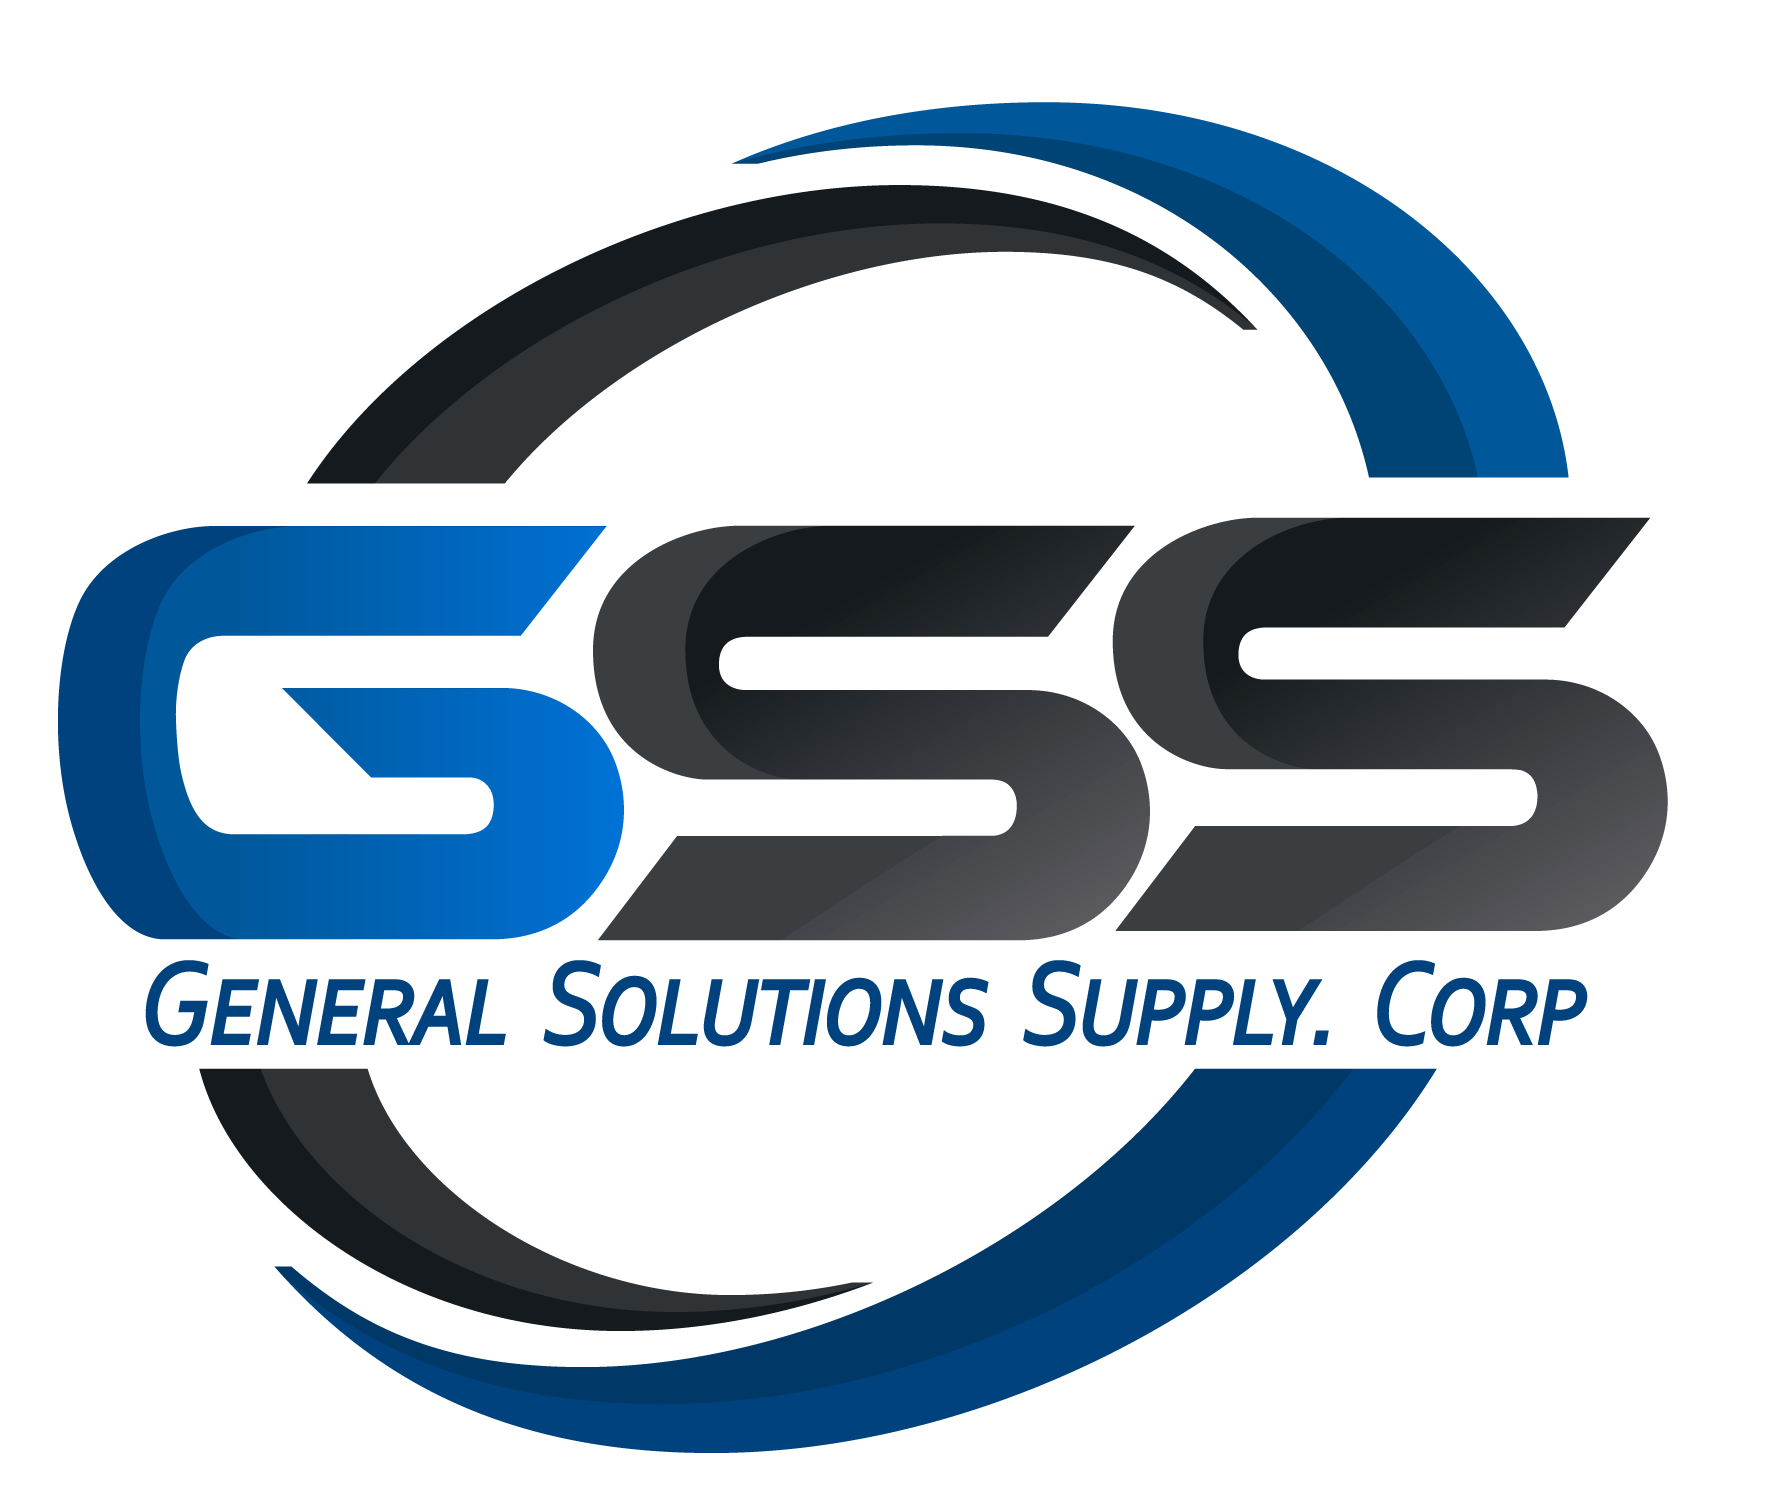 General Solutions Supply Corp.